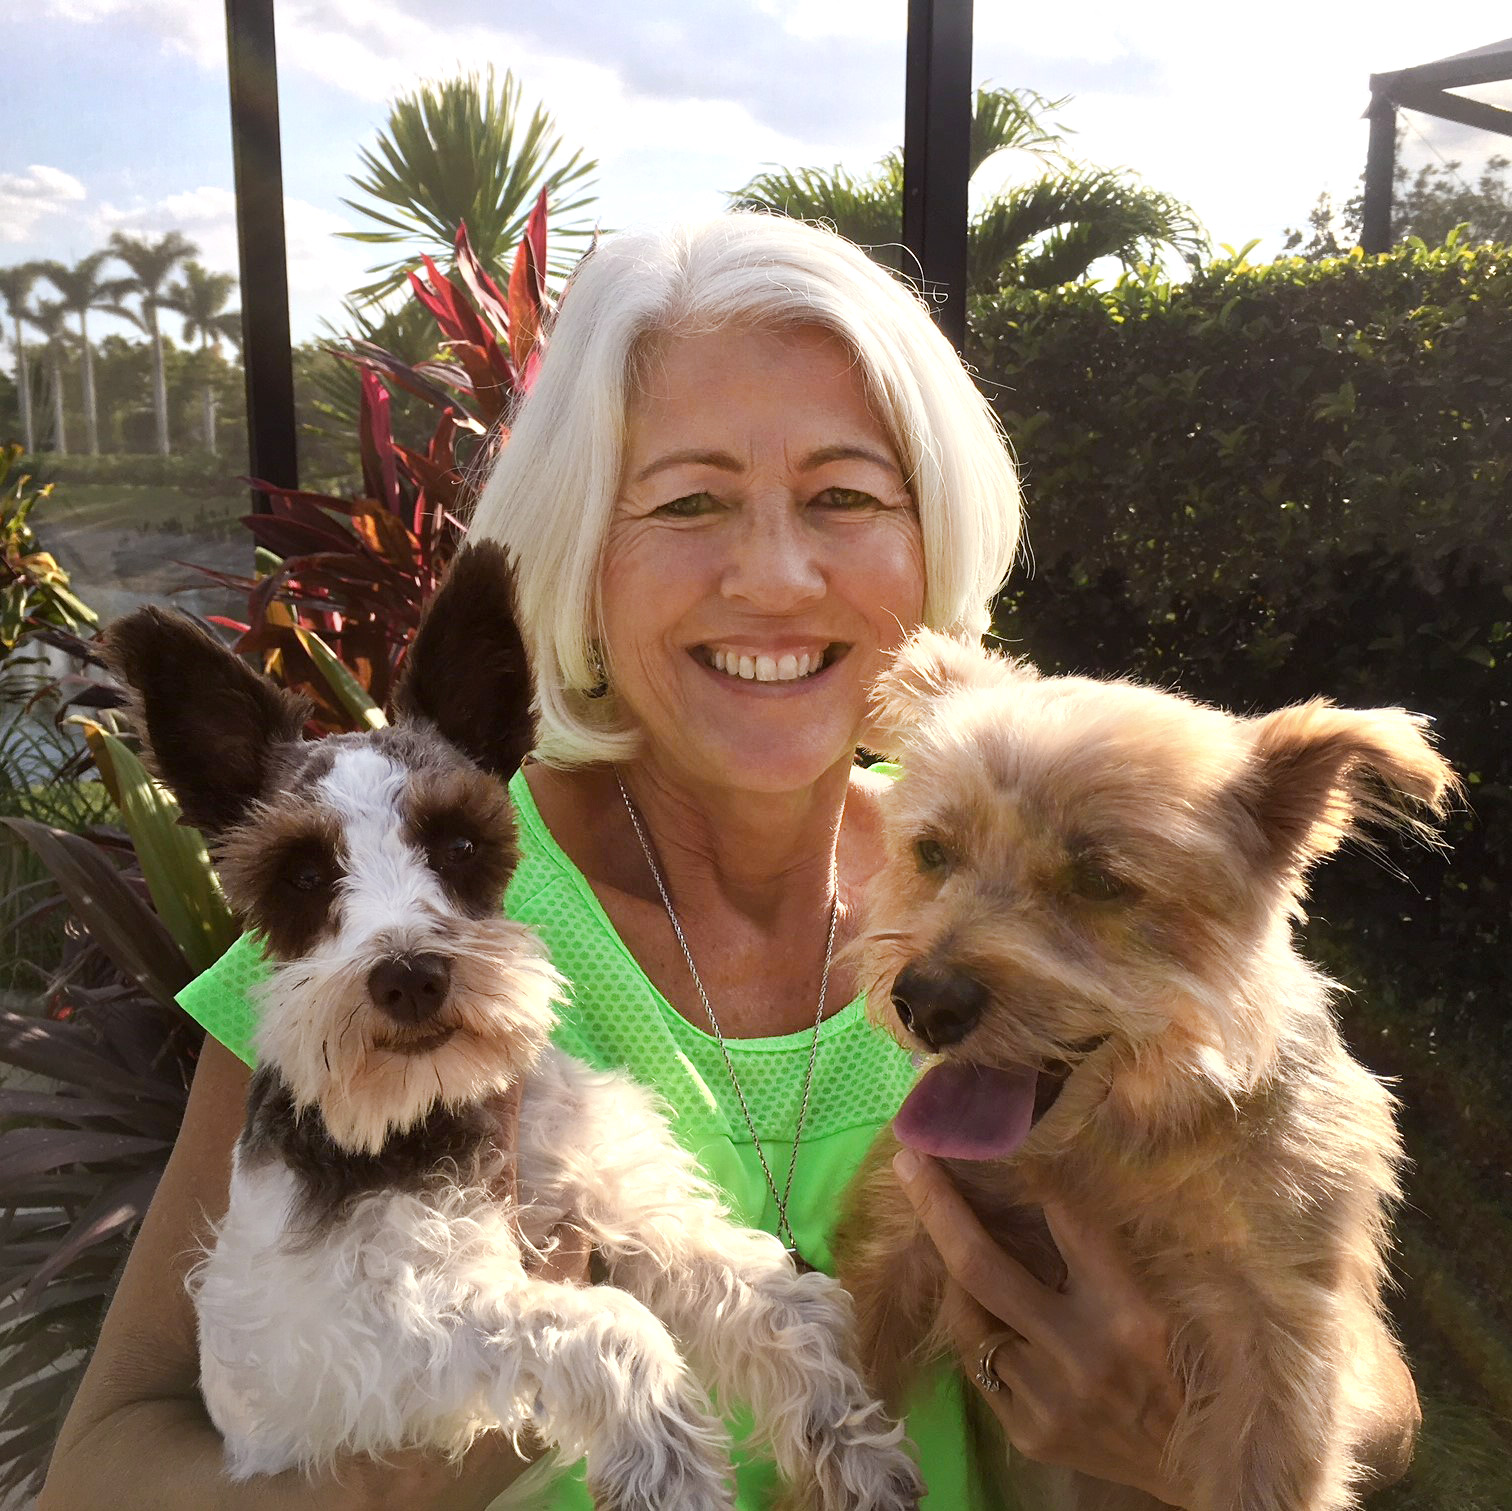 Dr Veronique with her dogs